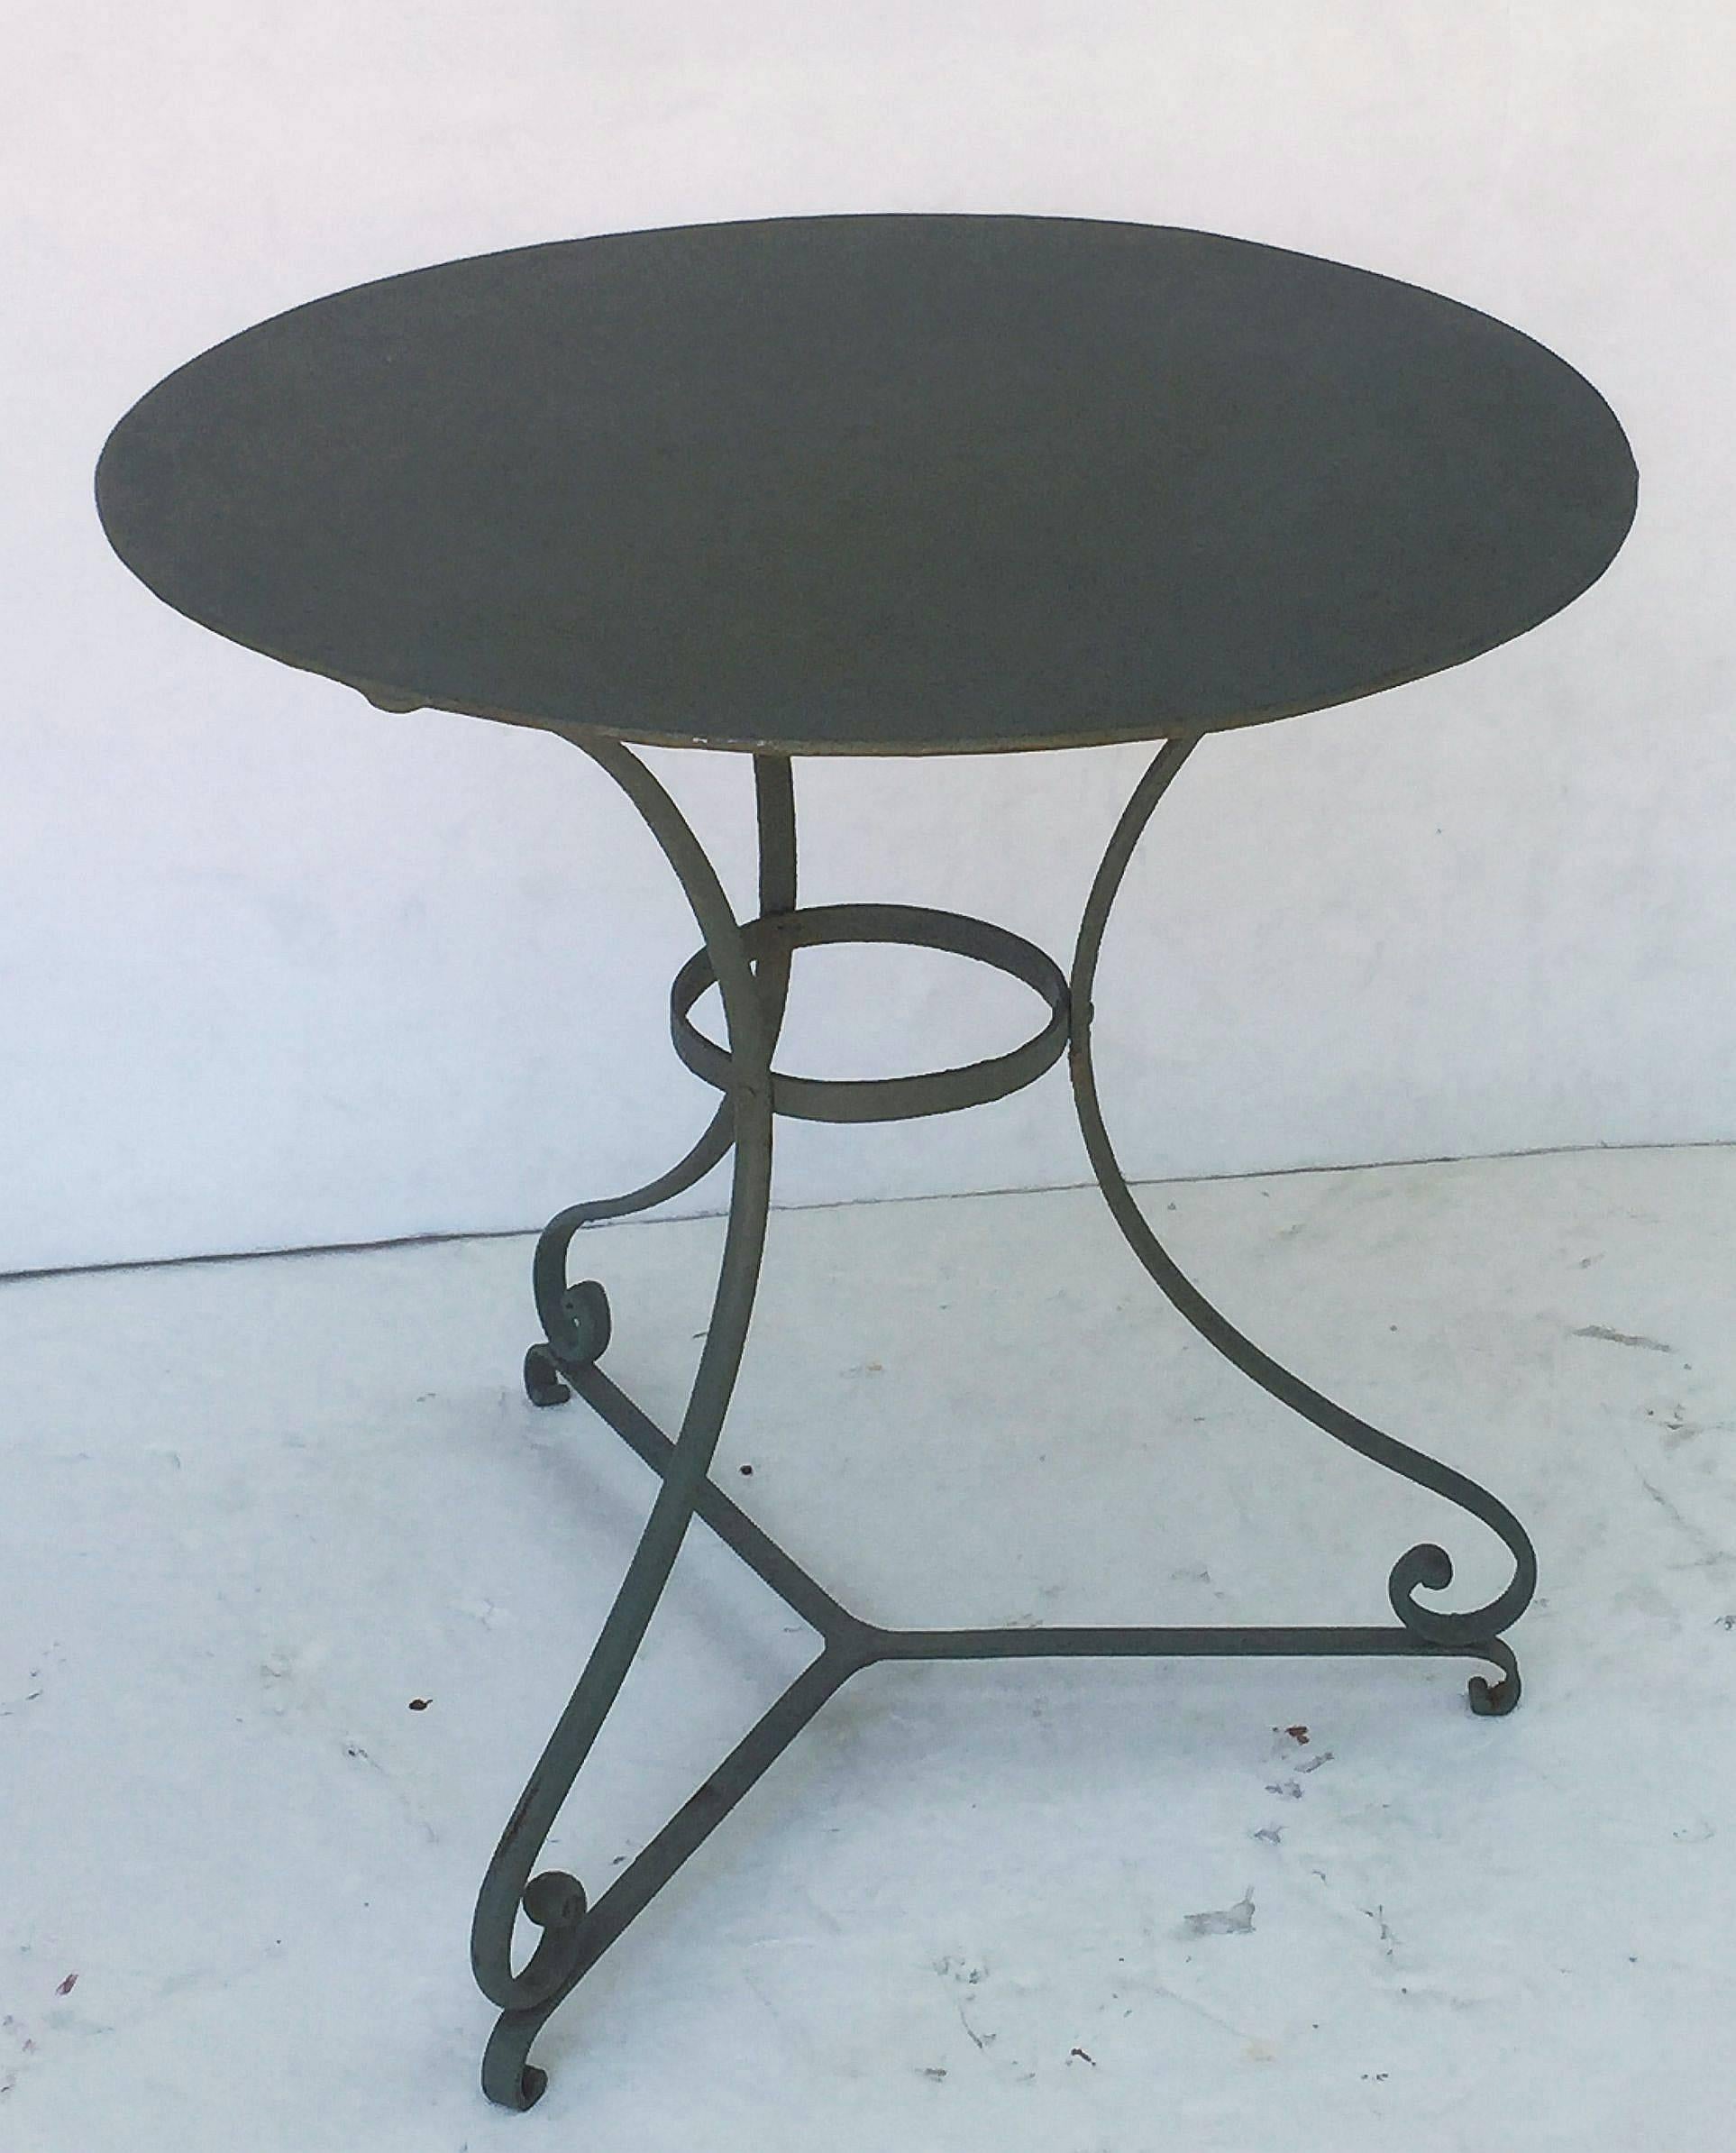 A fine French green-painted café or bistro pub table featuring a round or circular metal top, attached to a tripod base with serpentine legs and tripod stretcher.

Great for an indoor or outdoor garden, garden room, or patio

Measures: Height 28